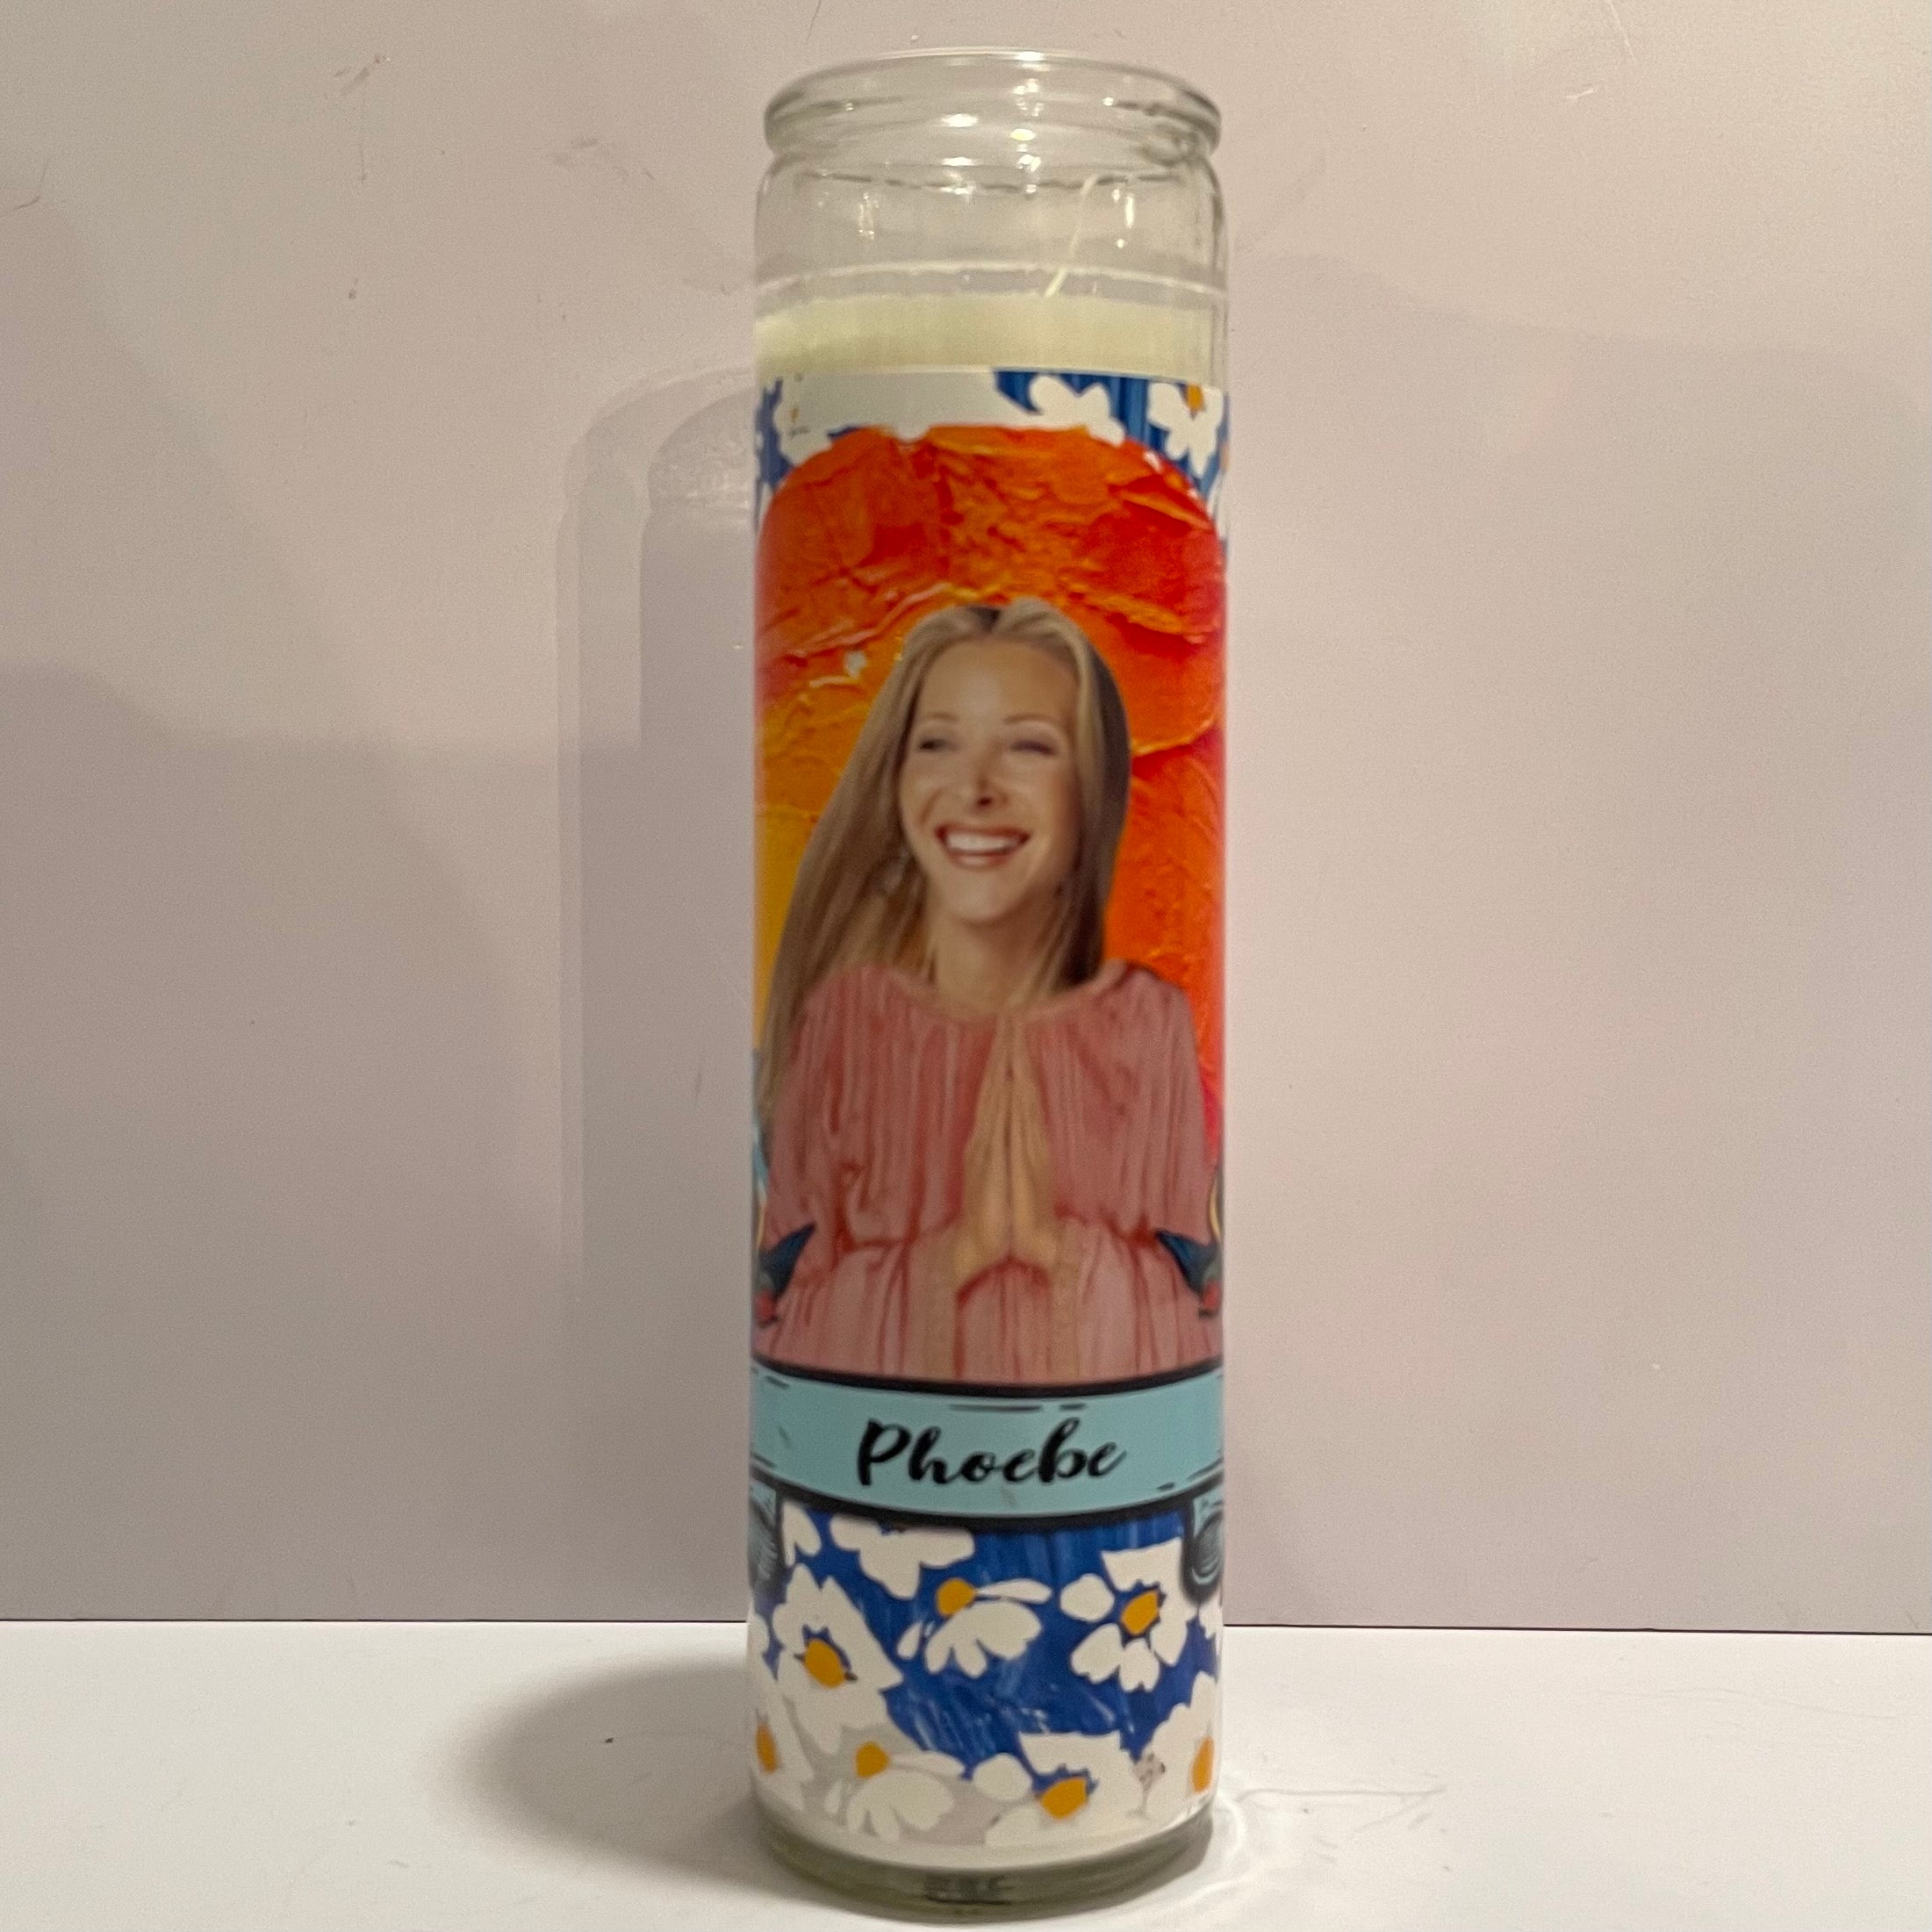 Pheobe from FRIENDS Prayer Candle